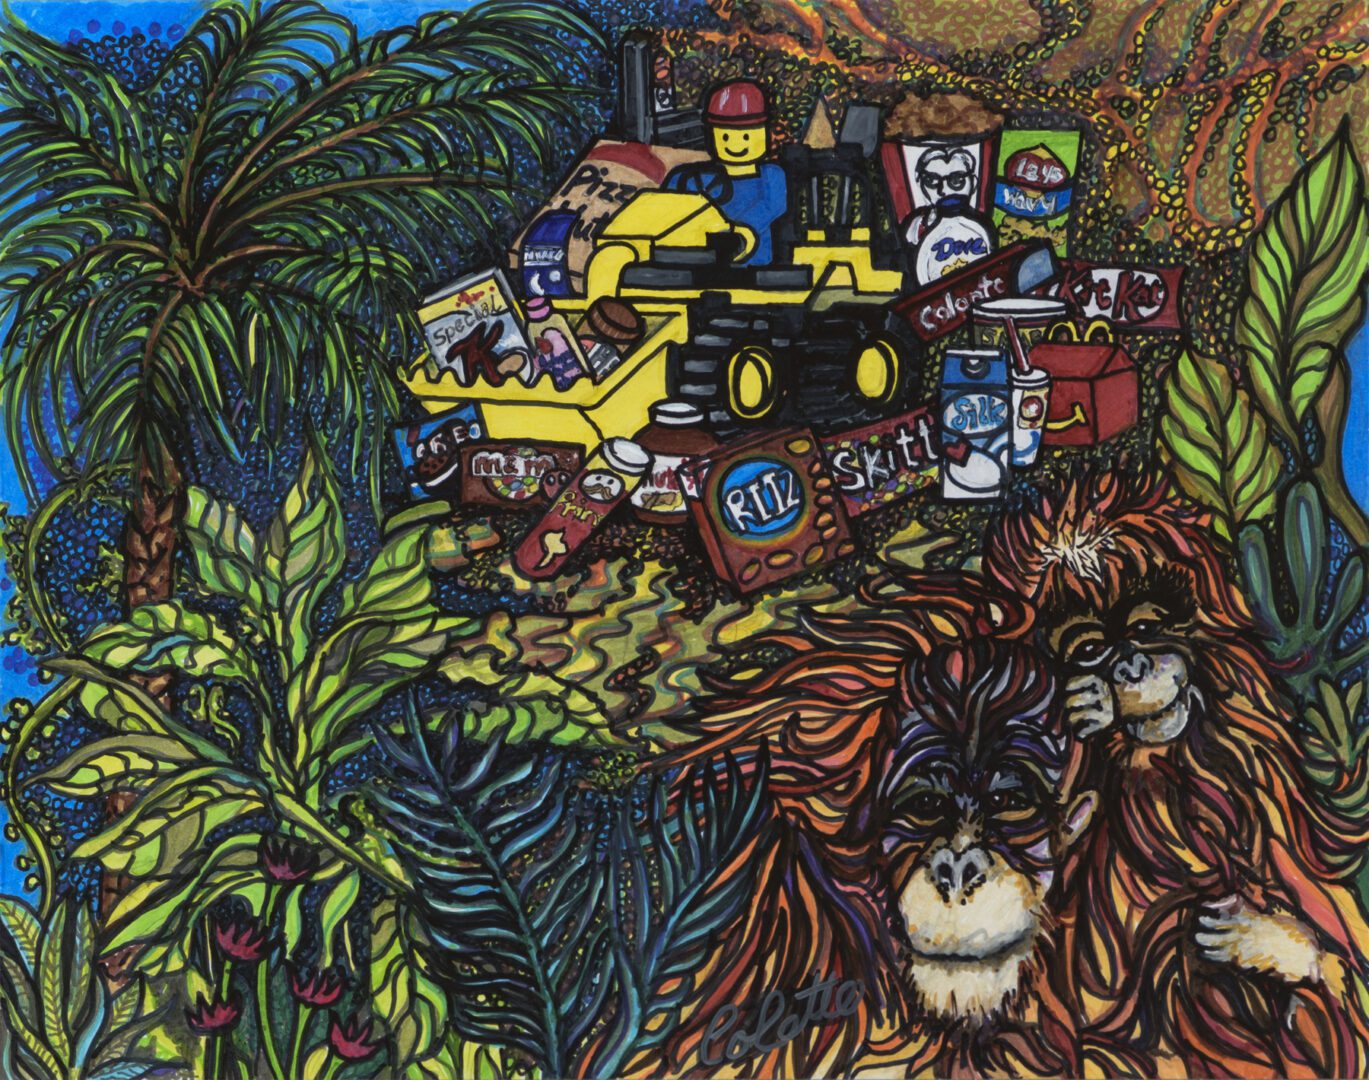 A painting of a gorilla and a construction truck